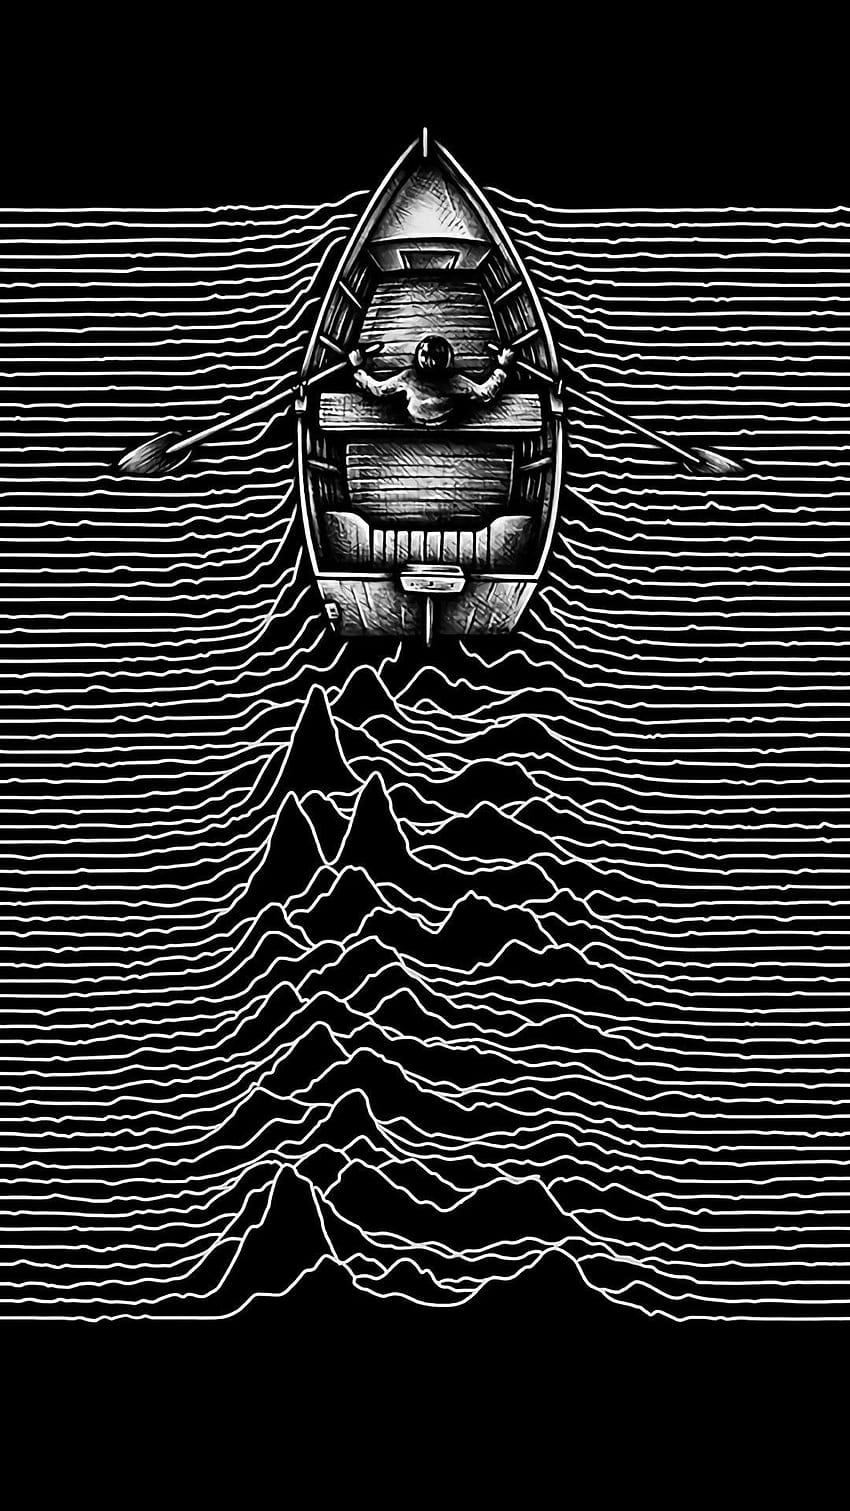 Joy Division Unknown Pleasures posted by Ryan Walker, joy division iphone HD phone wallpaper